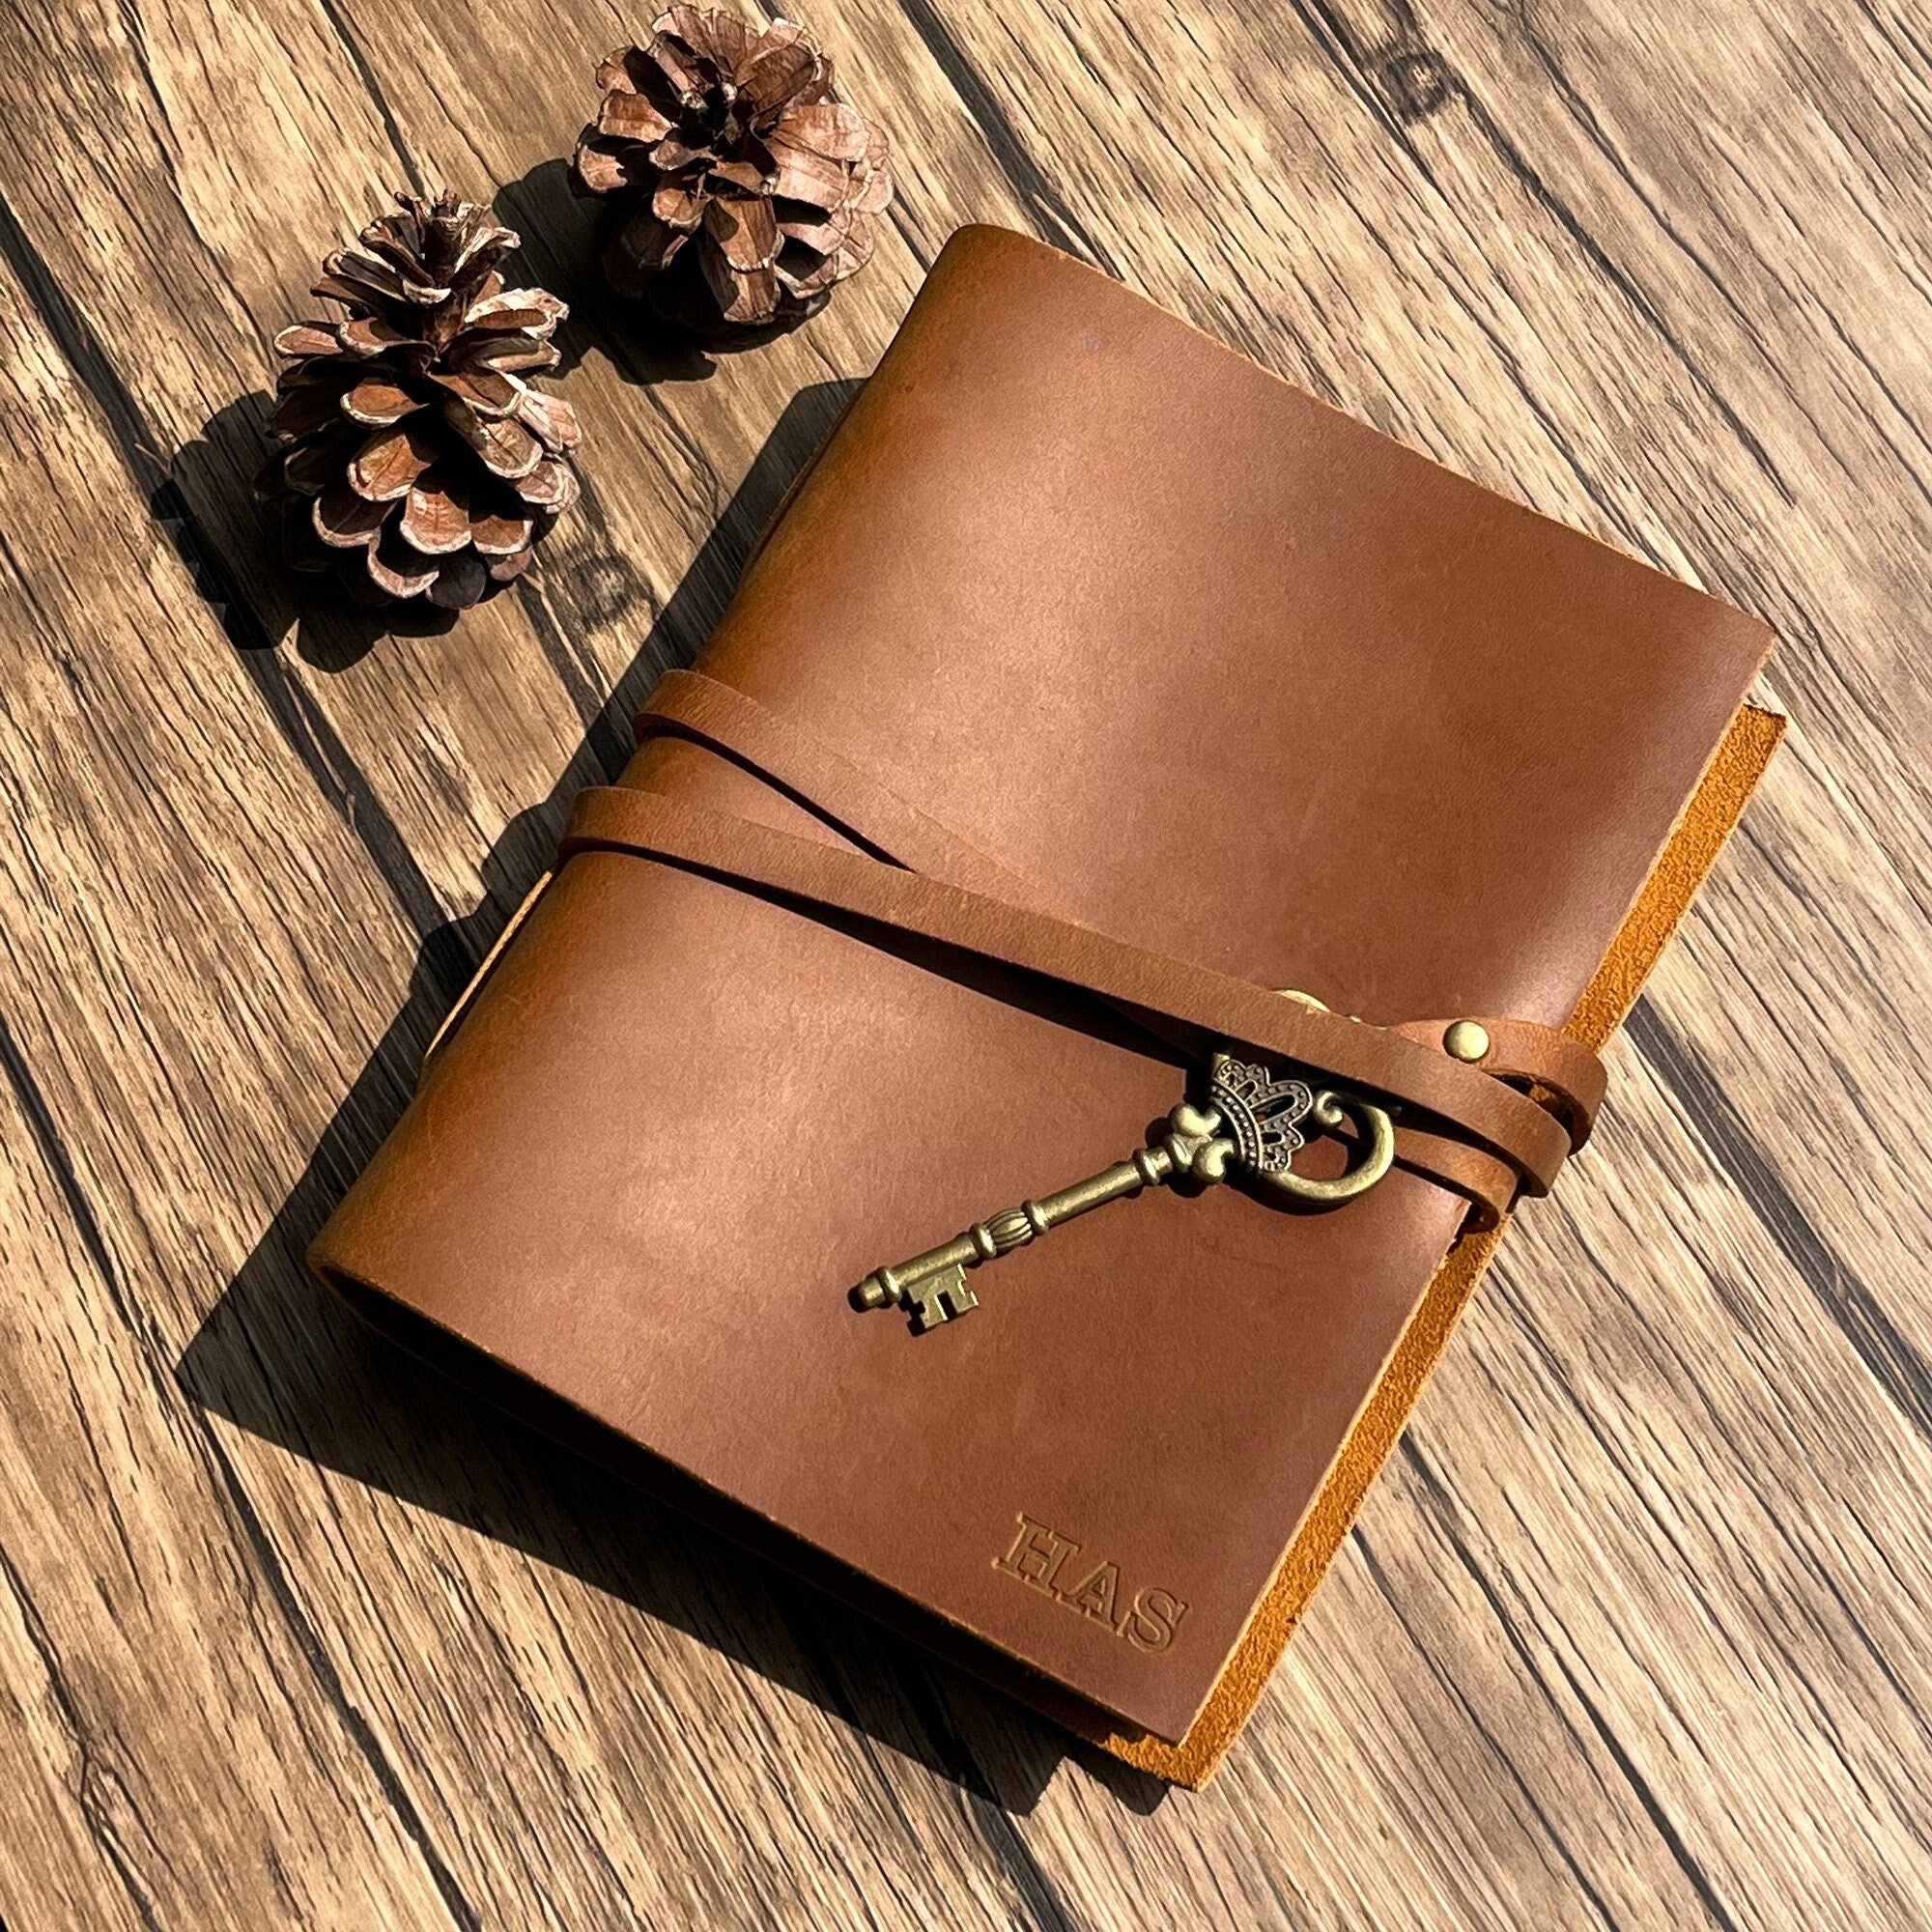 Large Vintage Leather Journal and Sketchbook - 320 Pages - 9 x 12 - Gift Box Included - Handmade Rustic Writing Notebook